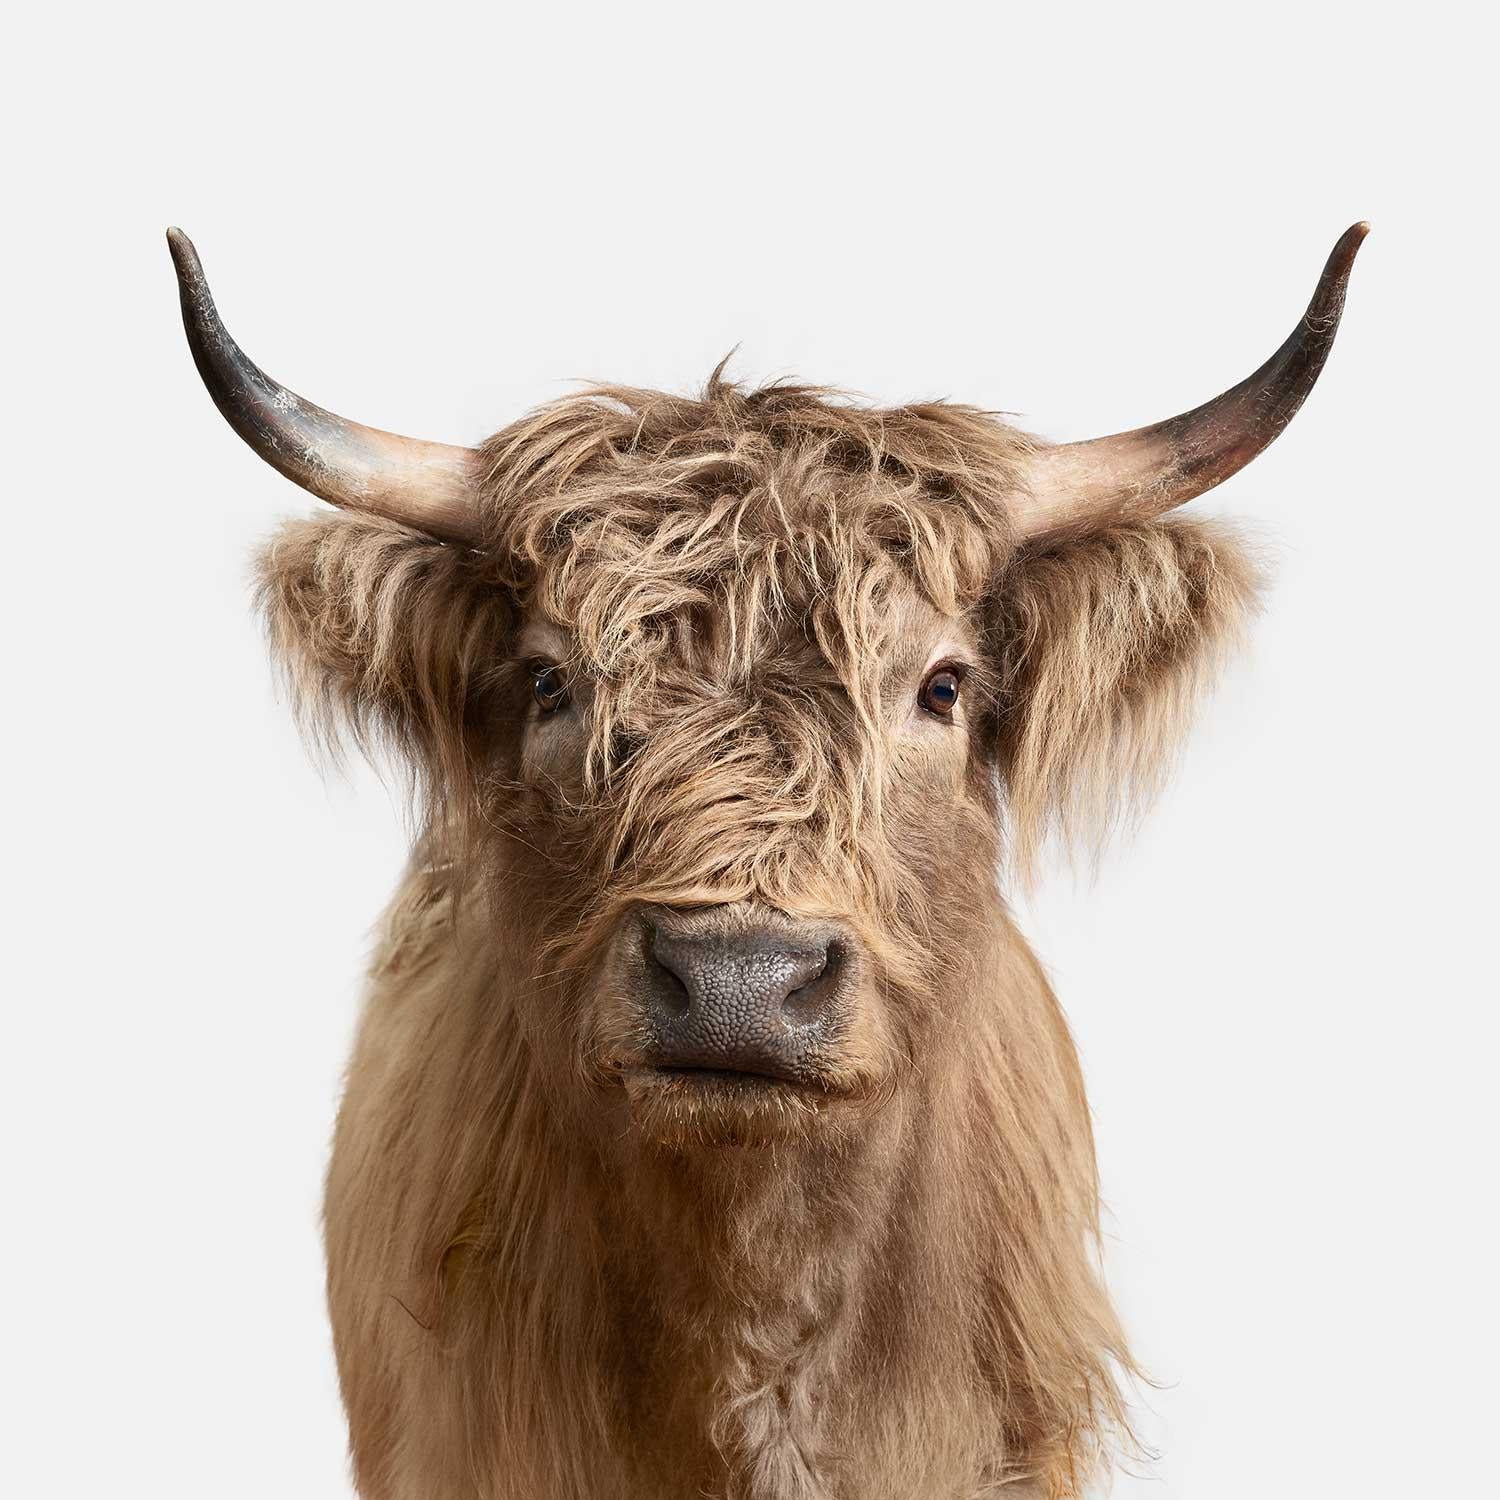 Highland Cow No. 2 - Photograph by Randal Ford